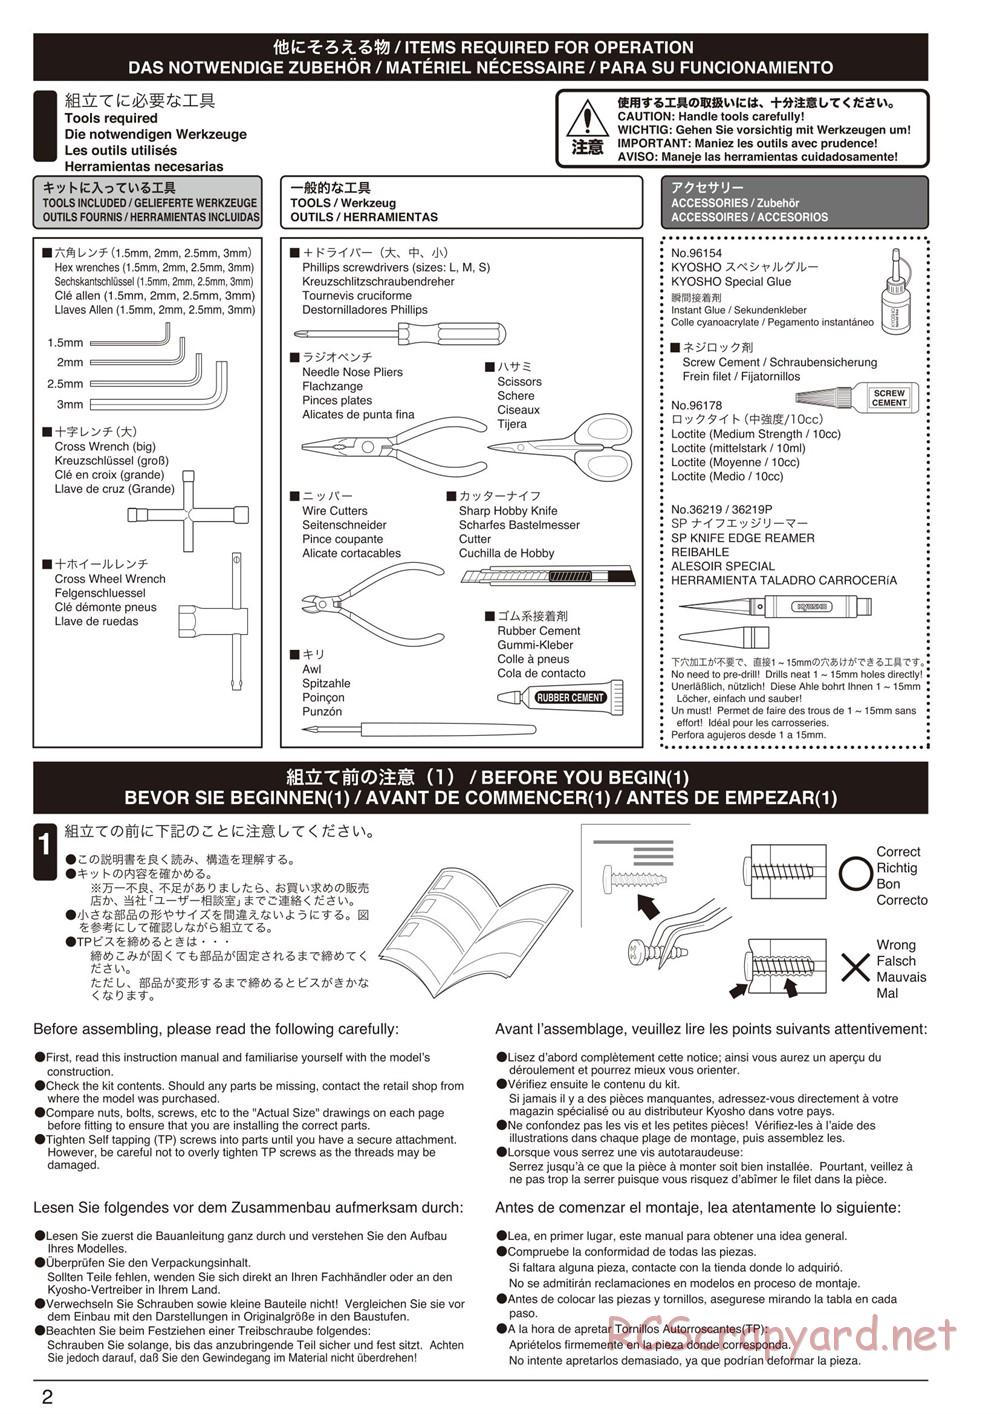 Kyosho - Inferno Neo 2.0 - Manual - Page 2